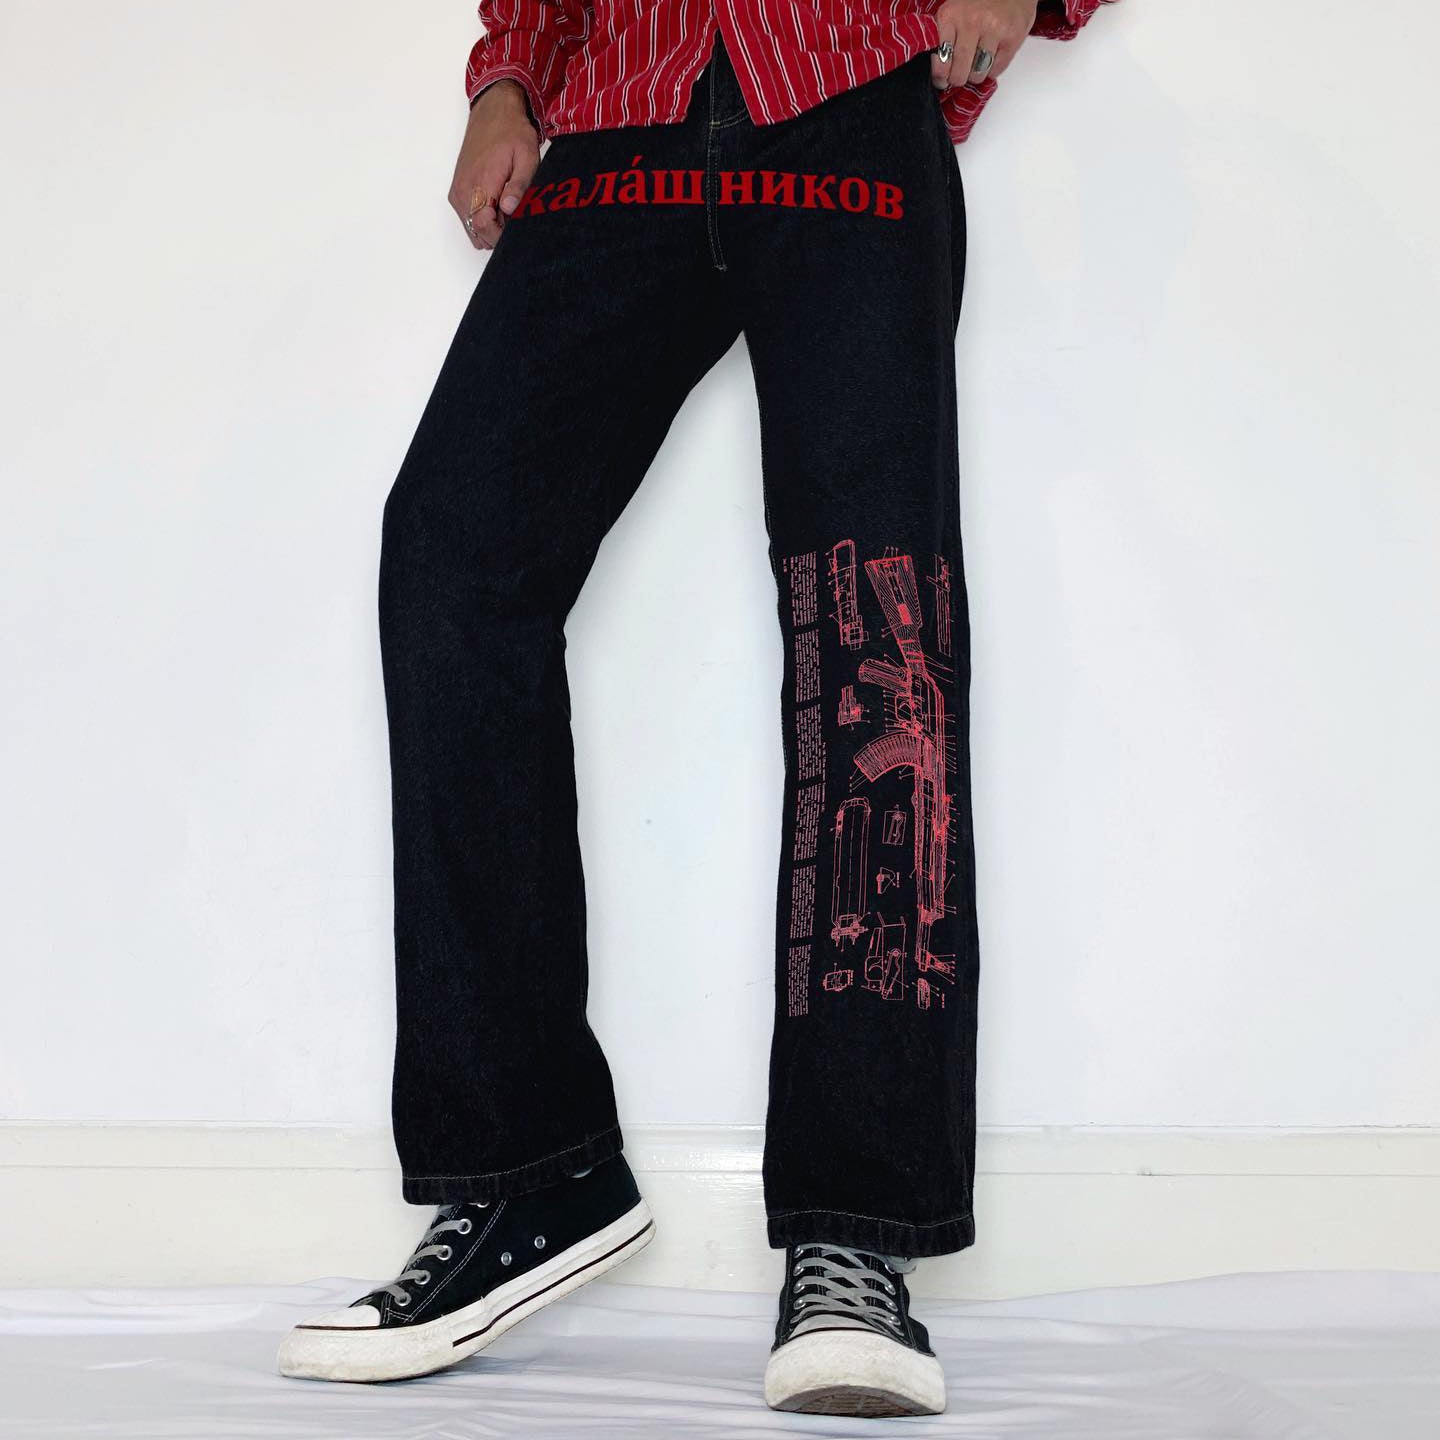 Personalized fashion printed jeans